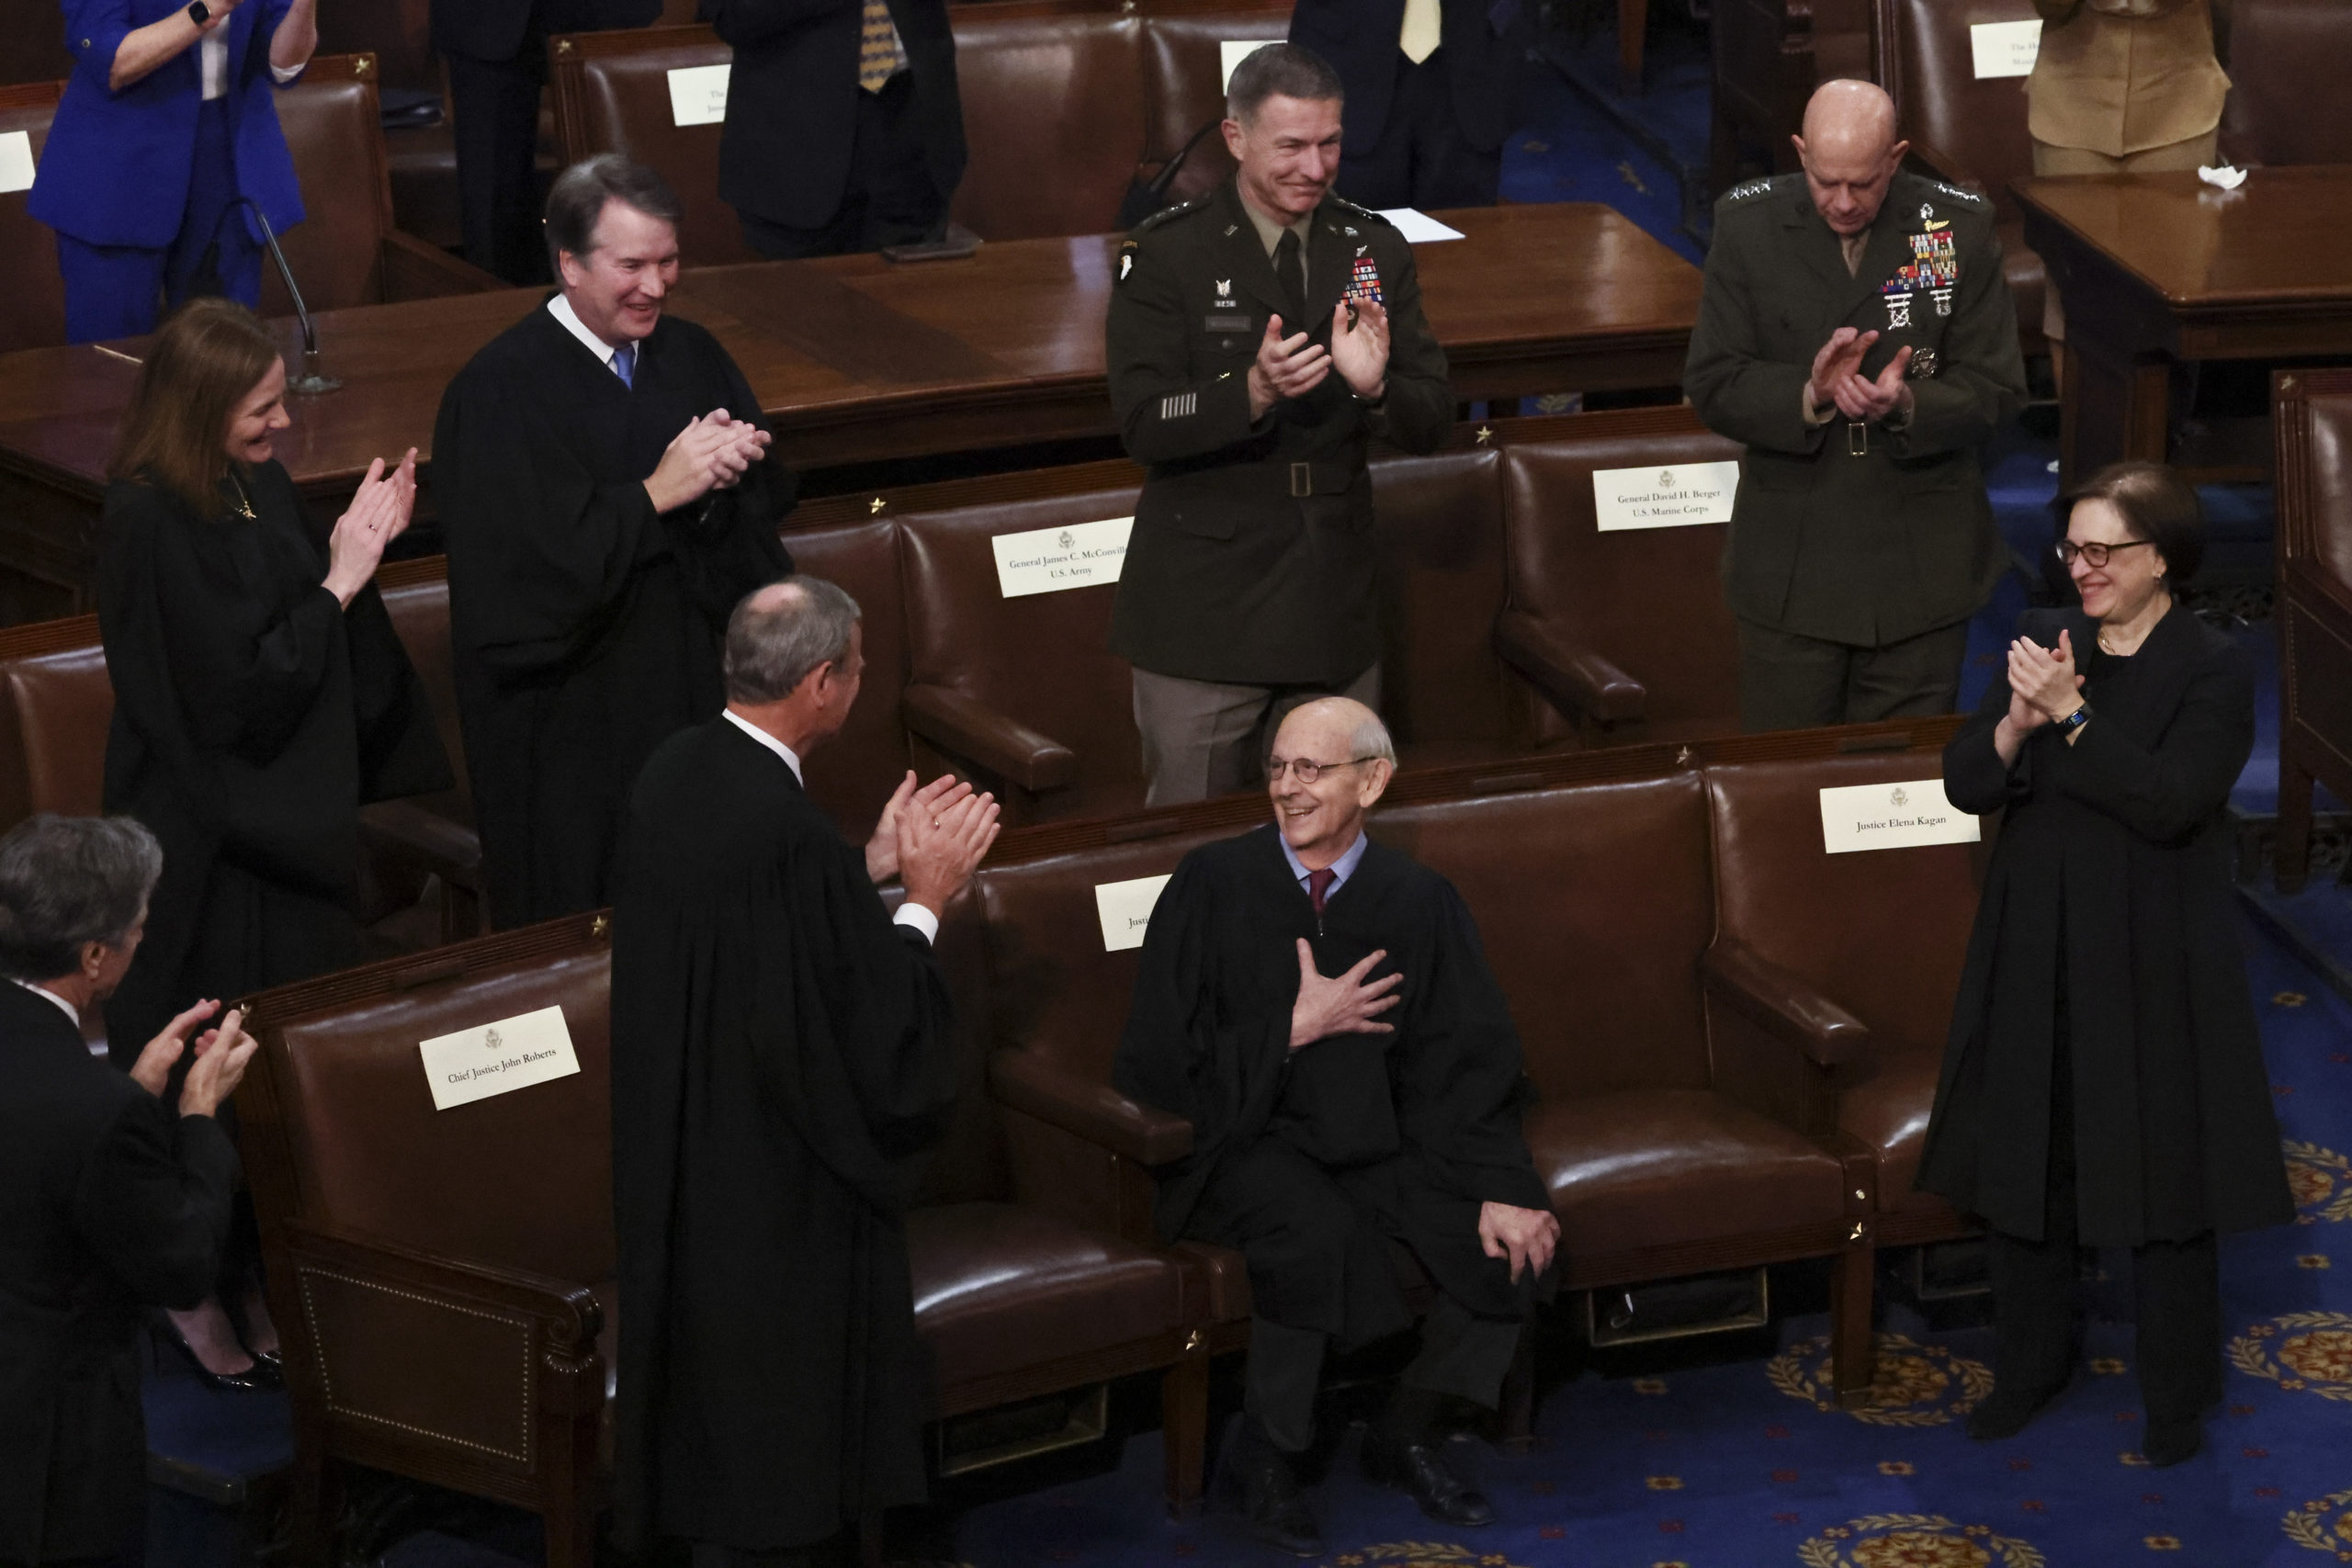 WASHINGTON, DC - MARCH 01: U.S. Supreme Court Chief Justice John Roberts and Associate Justices Amy Coney Barrett, Brett Kavanaugh and Elena Kagan as well as U.S. Army Chief of Staff General James McConville and U.S. Marines Chief of Staff General David Berger applaud retiring Supreme Court Justice Stephen Breyer as Breyer is honored by U.S. President Joe Biden as Biden delivers the State of the Union address during a joint session of Congress in the U.S. Capitol’s House Chamber March 01, 2022 in Washington, DC. During his first State of the Union address Biden spoke on his administration’s efforts to lead a global response to the Russian invasion of Ukraine, efforts to curb inflation and bringing the country out of the COVID-19 pandemic. (Photo by Evelyn Hockstein-Pool/Getty Images)